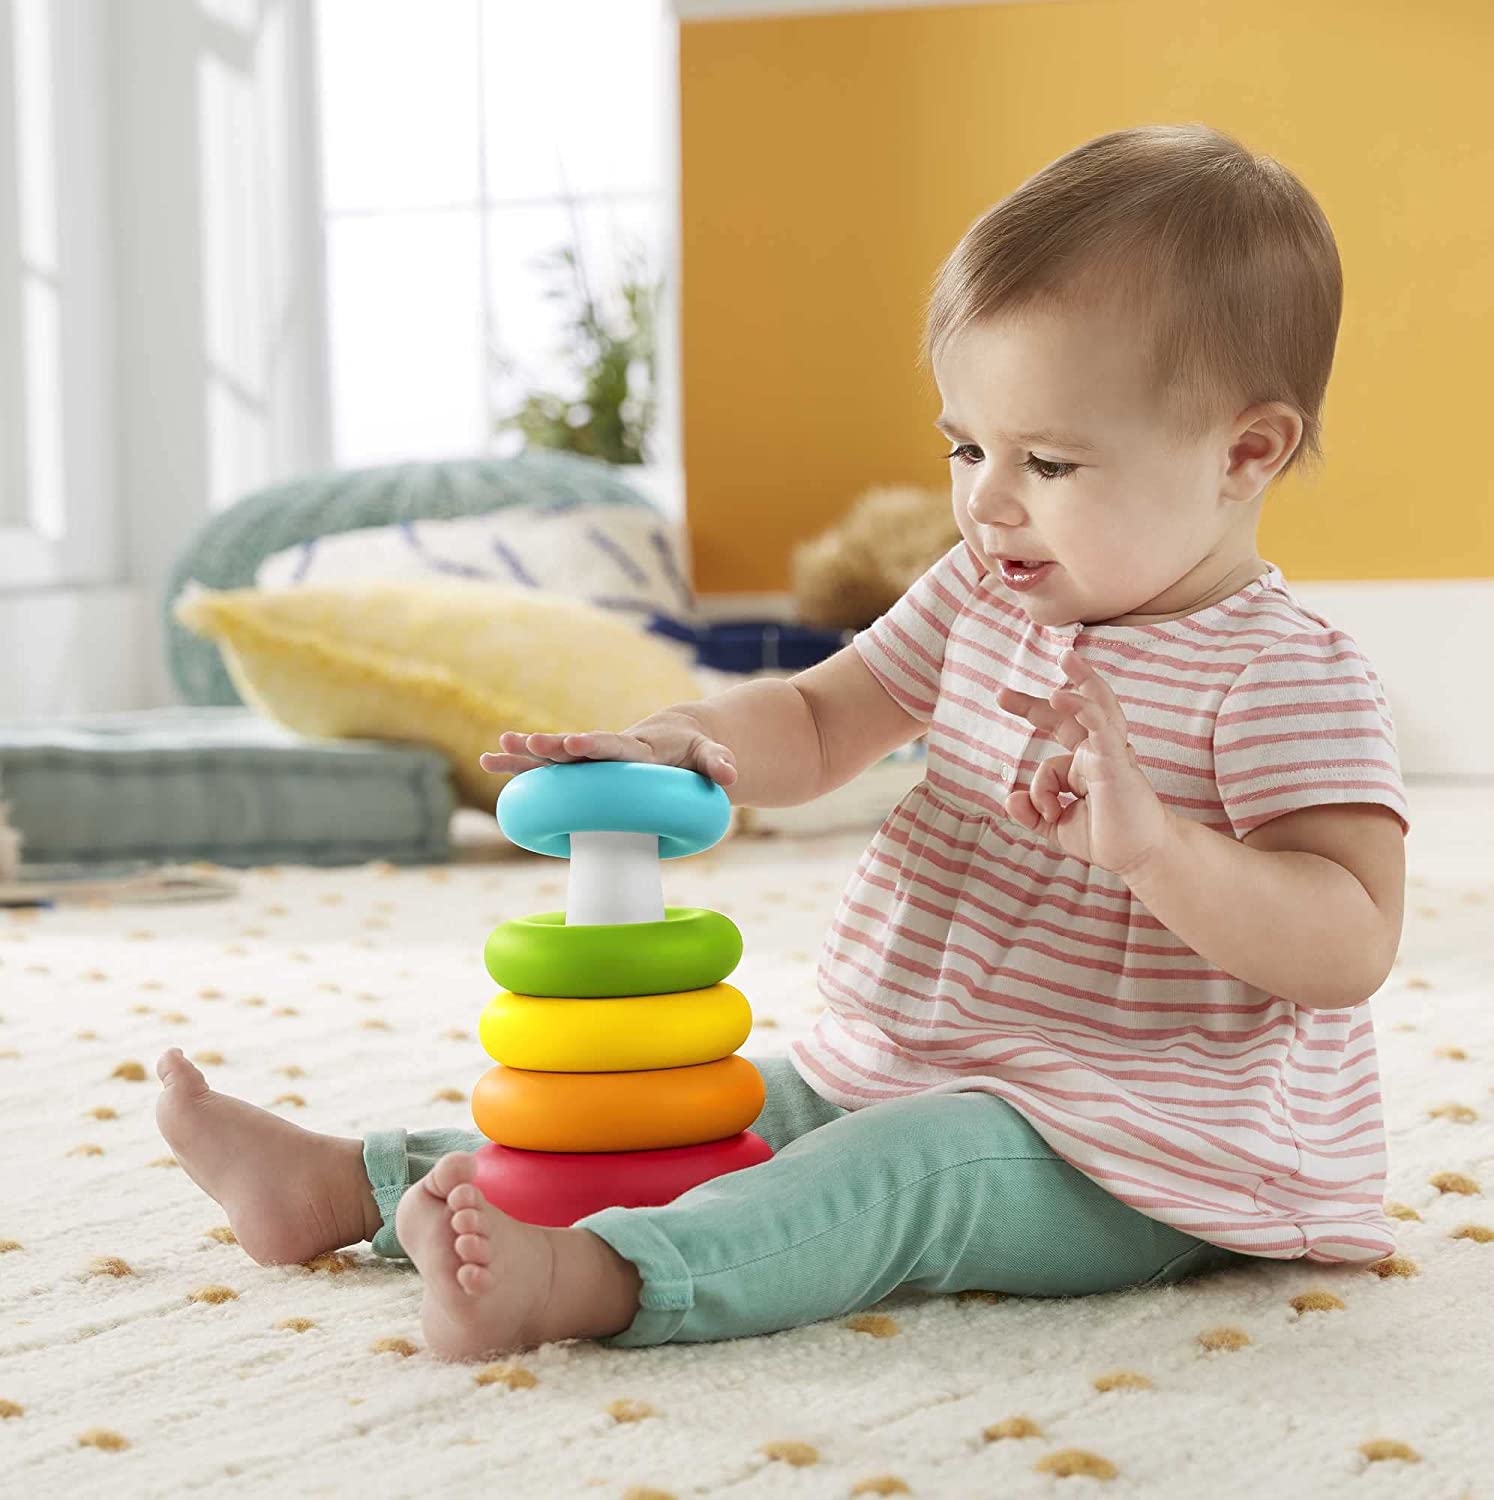 Fisher-Price Rock-a-Stack Classic stacking toy with 5 colorful rings to grasp, shake, and stack (Plant-Based Materials)